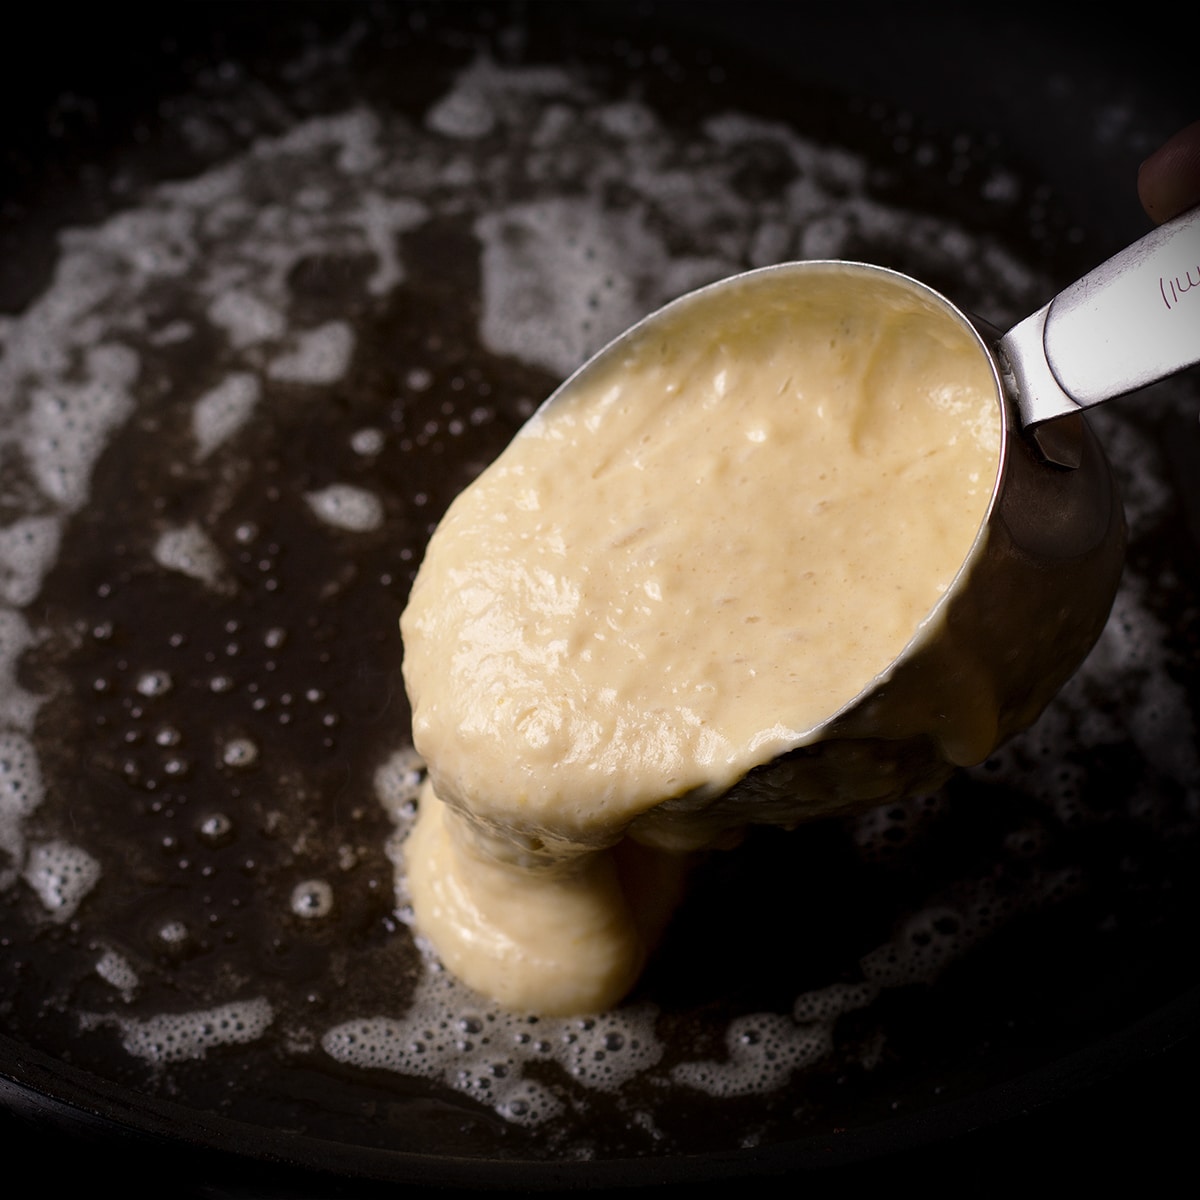 Using a measuring cup to pour pancake batter into a hot skillet.